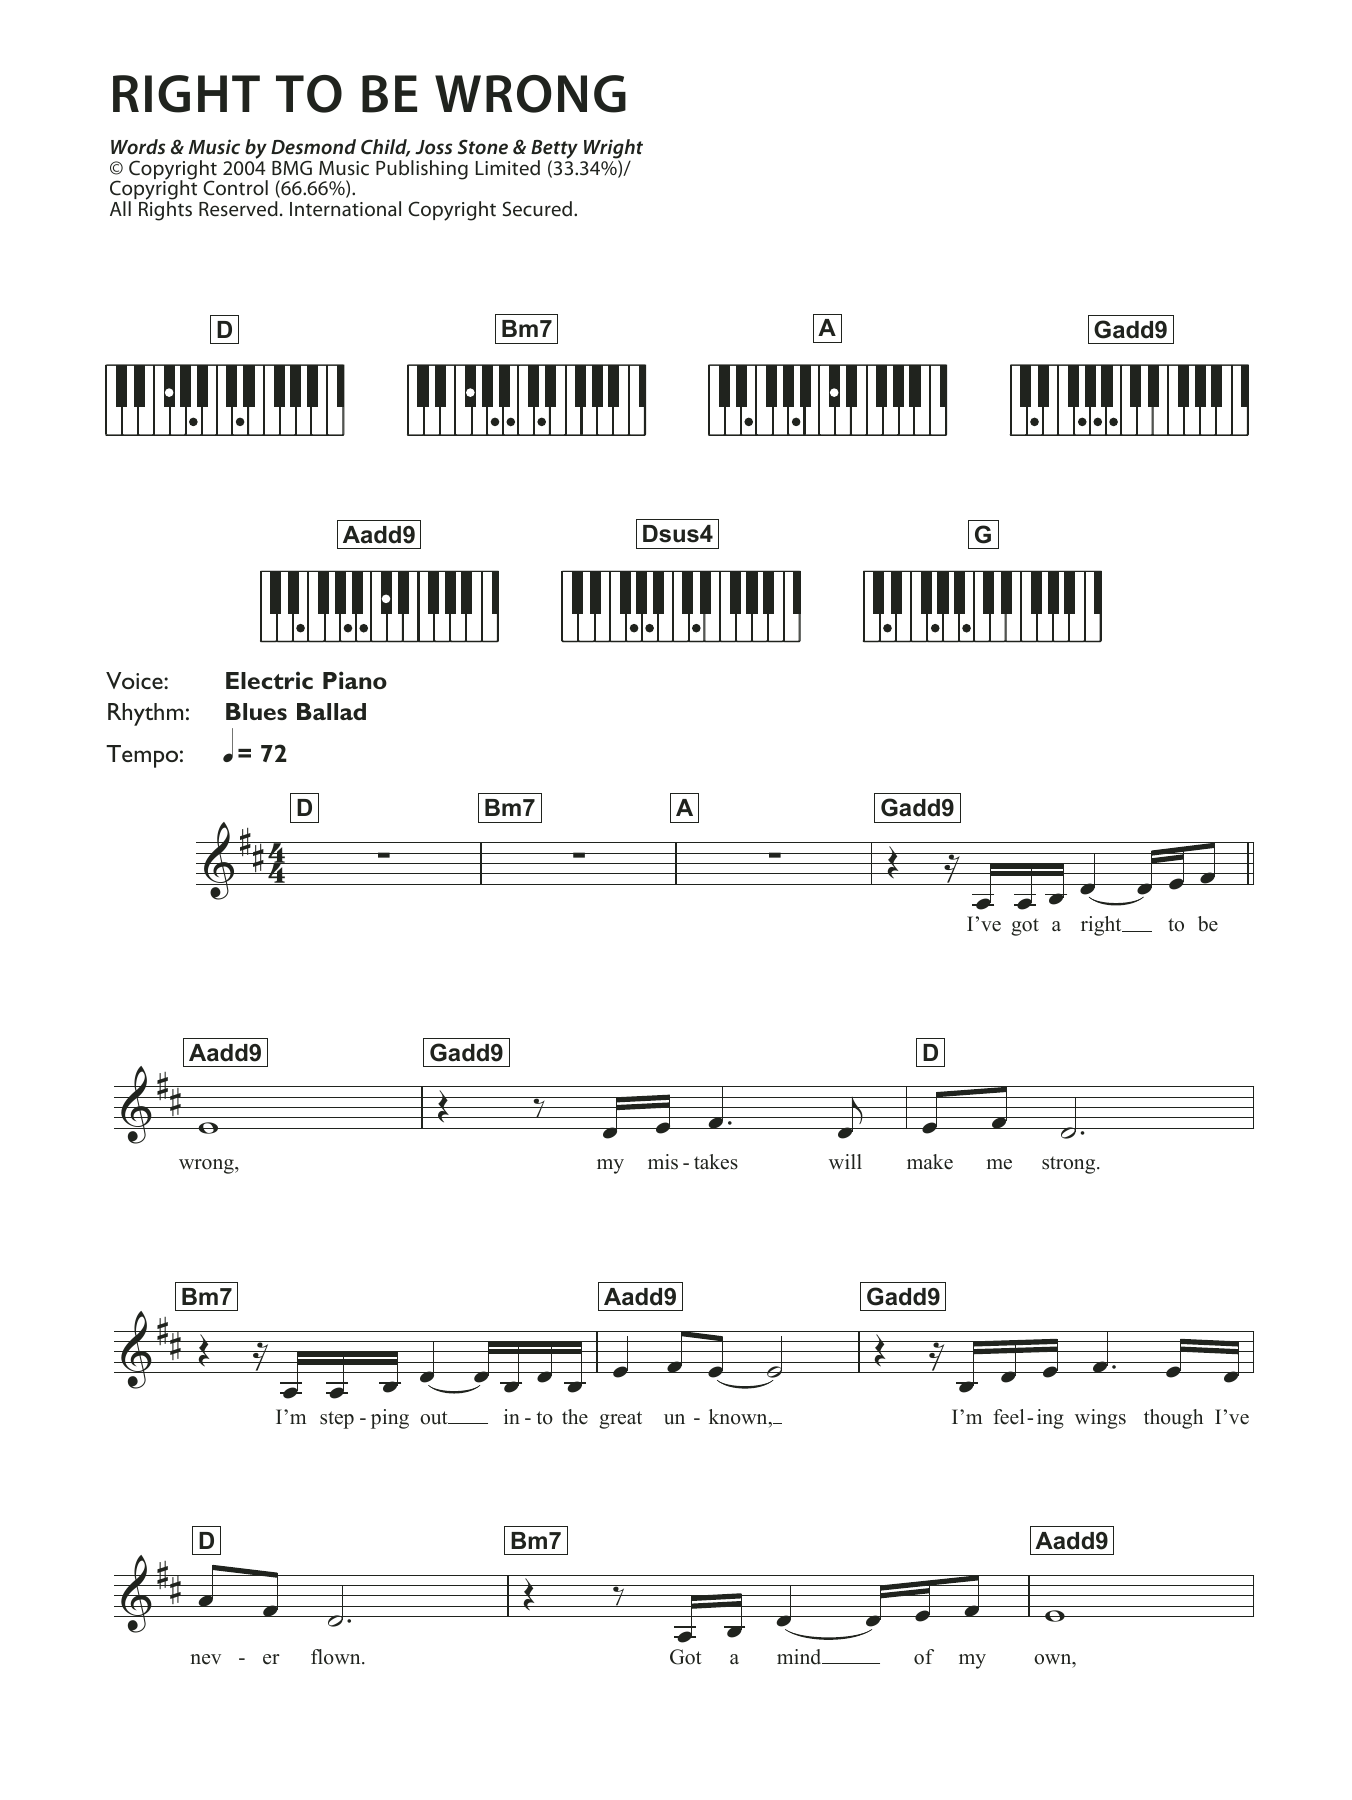 Download Joss Stone Right To Be Wrong Sheet Music